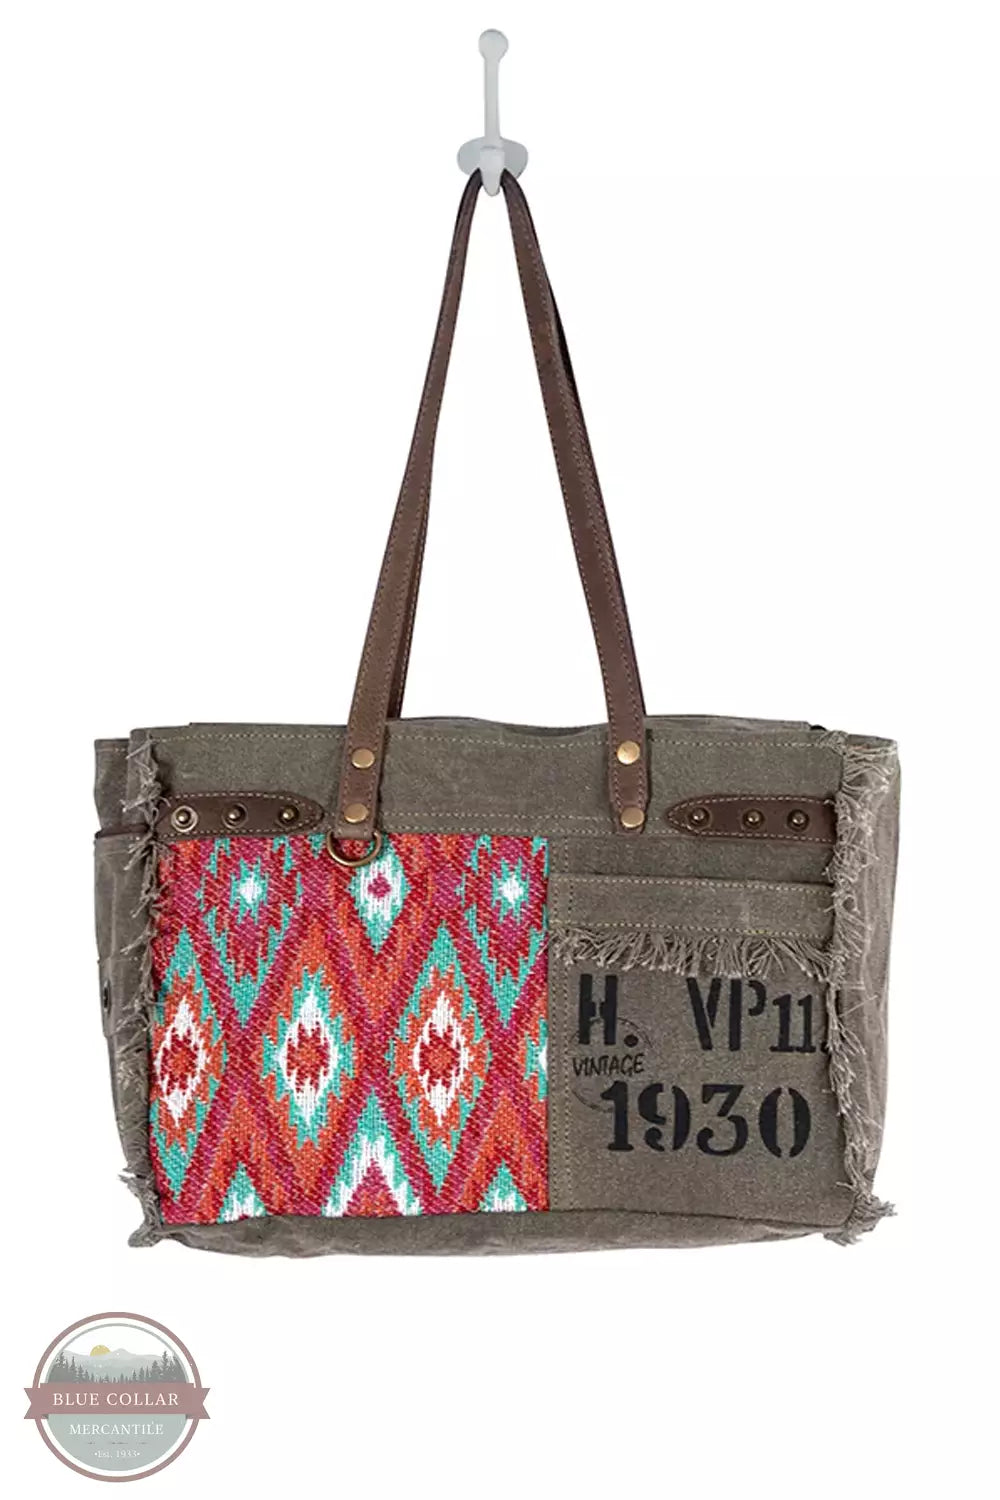 Myra Bag S-8436 High Trails VP11 Tote Bag Front View